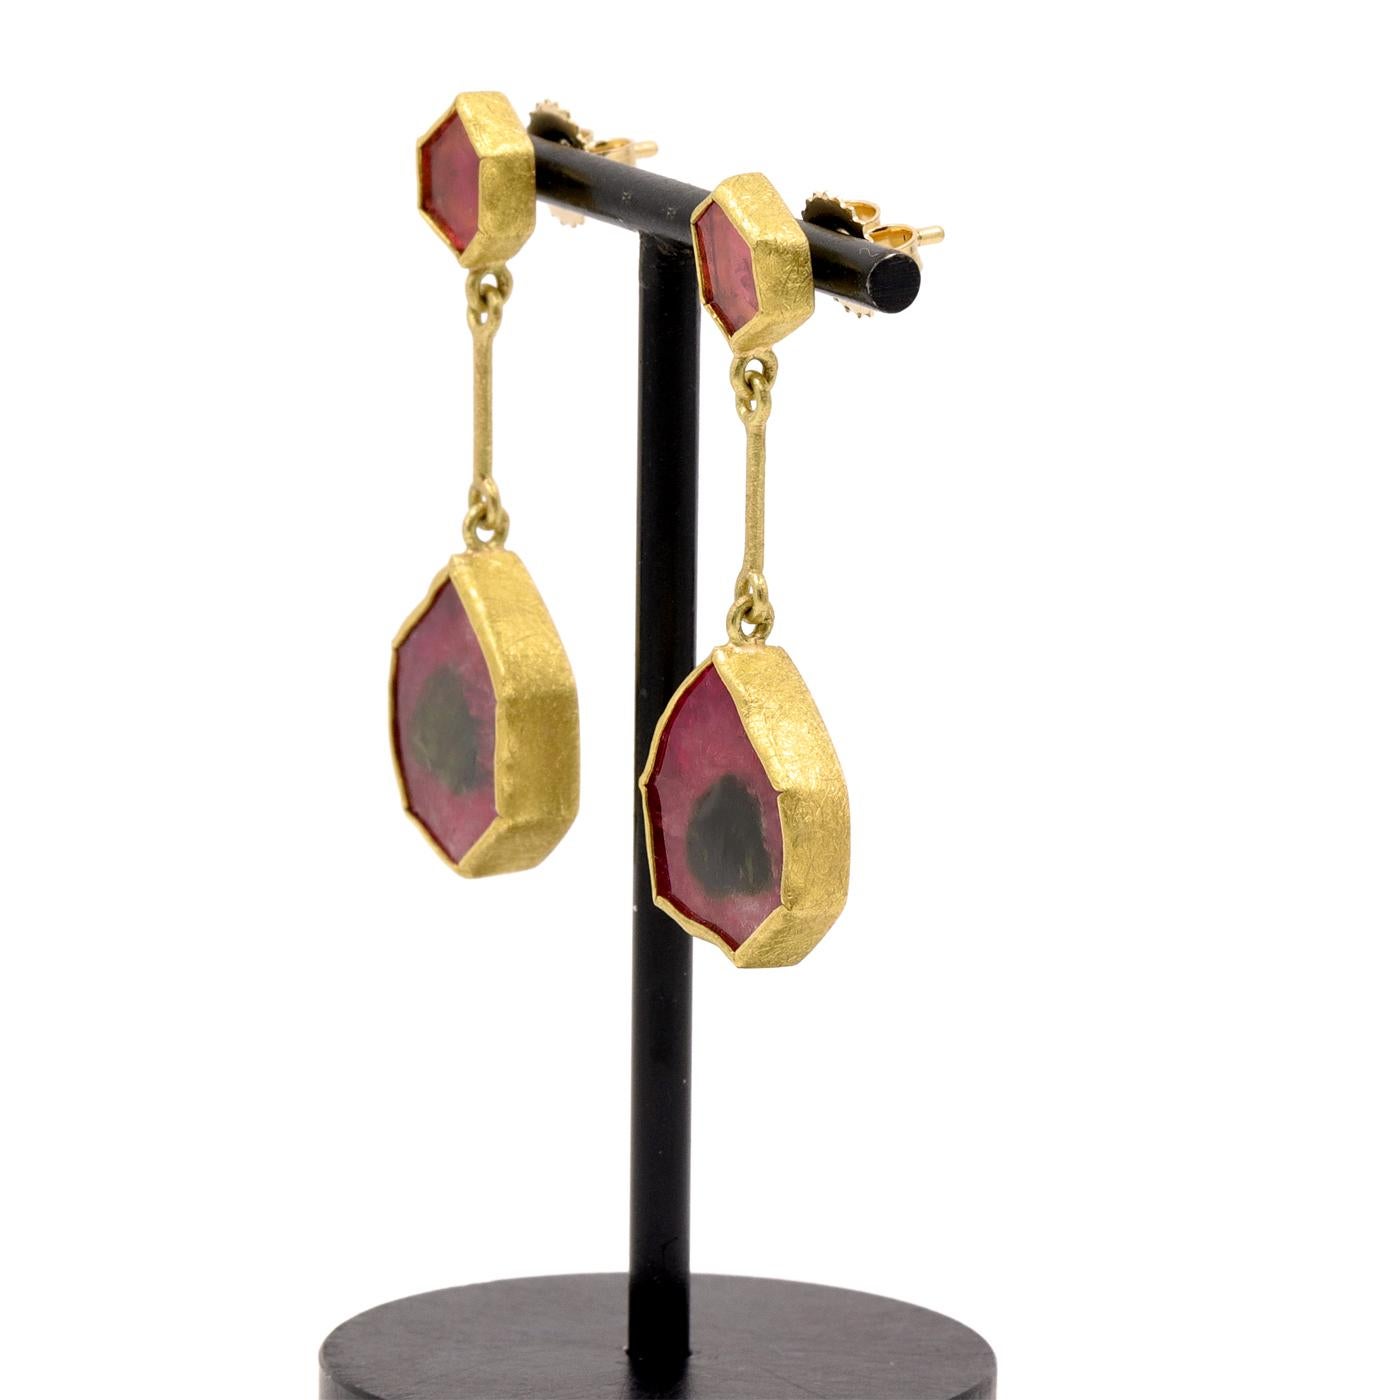 One of a Kind Segment Drop Earrings handmade signature-finished solid 22k yellow gold and 18k yellow gold by award-winning jewelry artist Petra Class showcasing a shimmering matched pair of hexagonal bi-color tourmaline dangling from the maker's